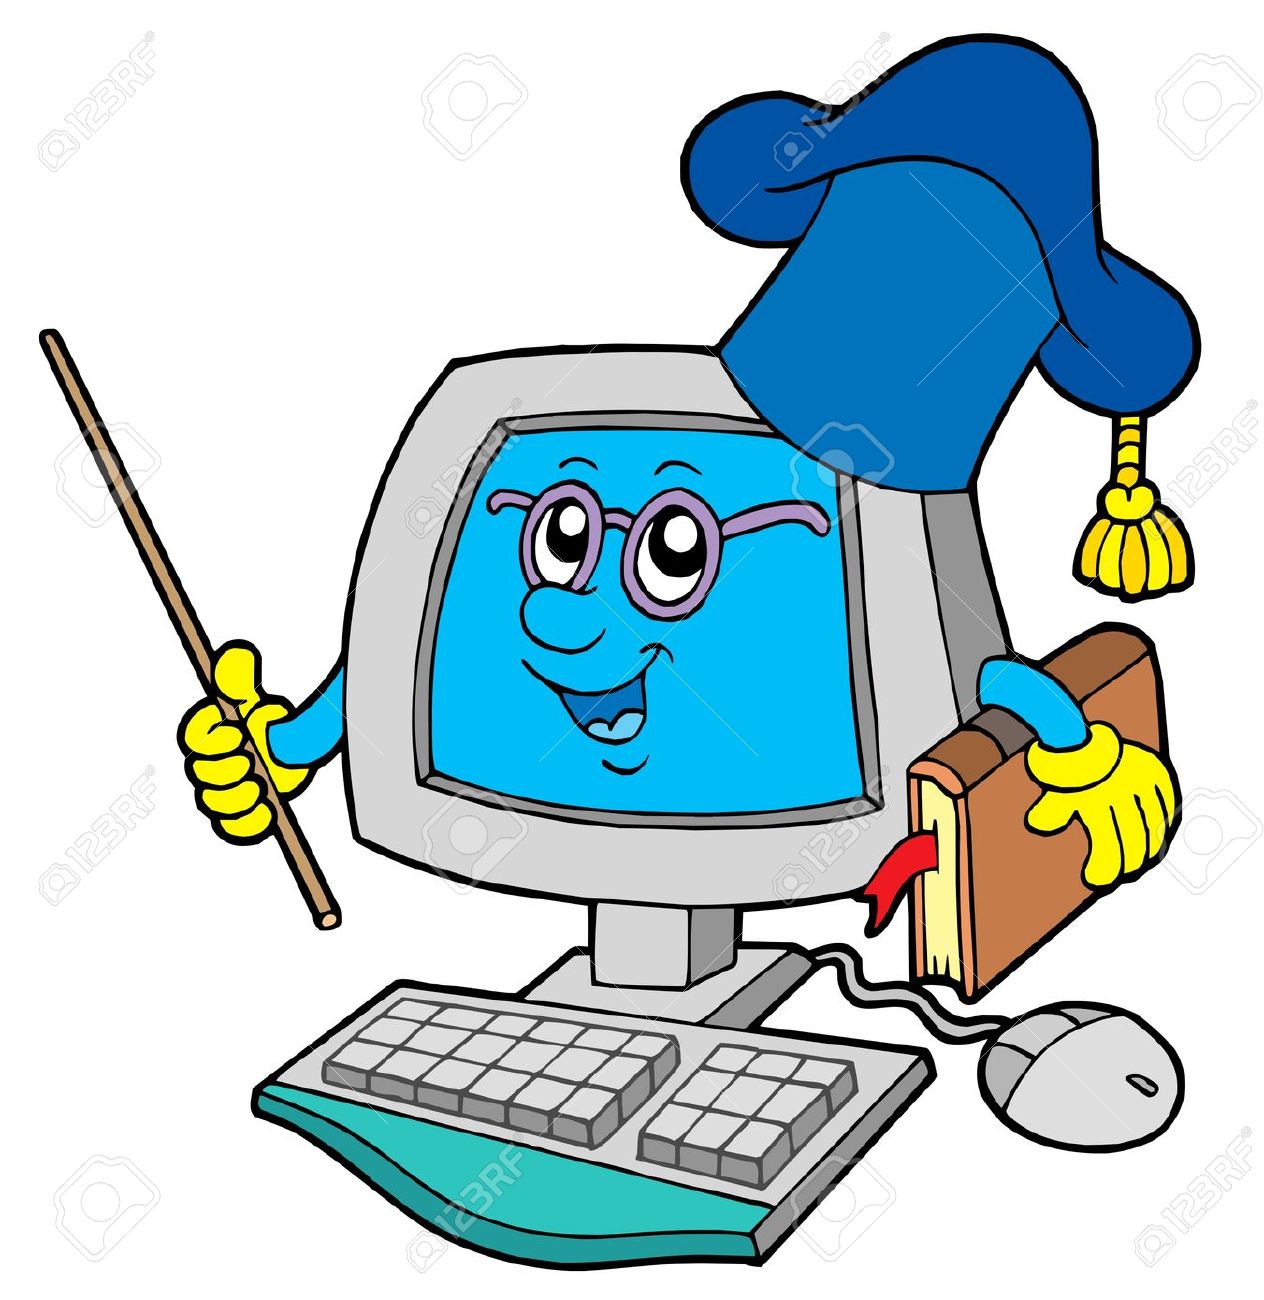 Technology clipart technology subject. Free download best 